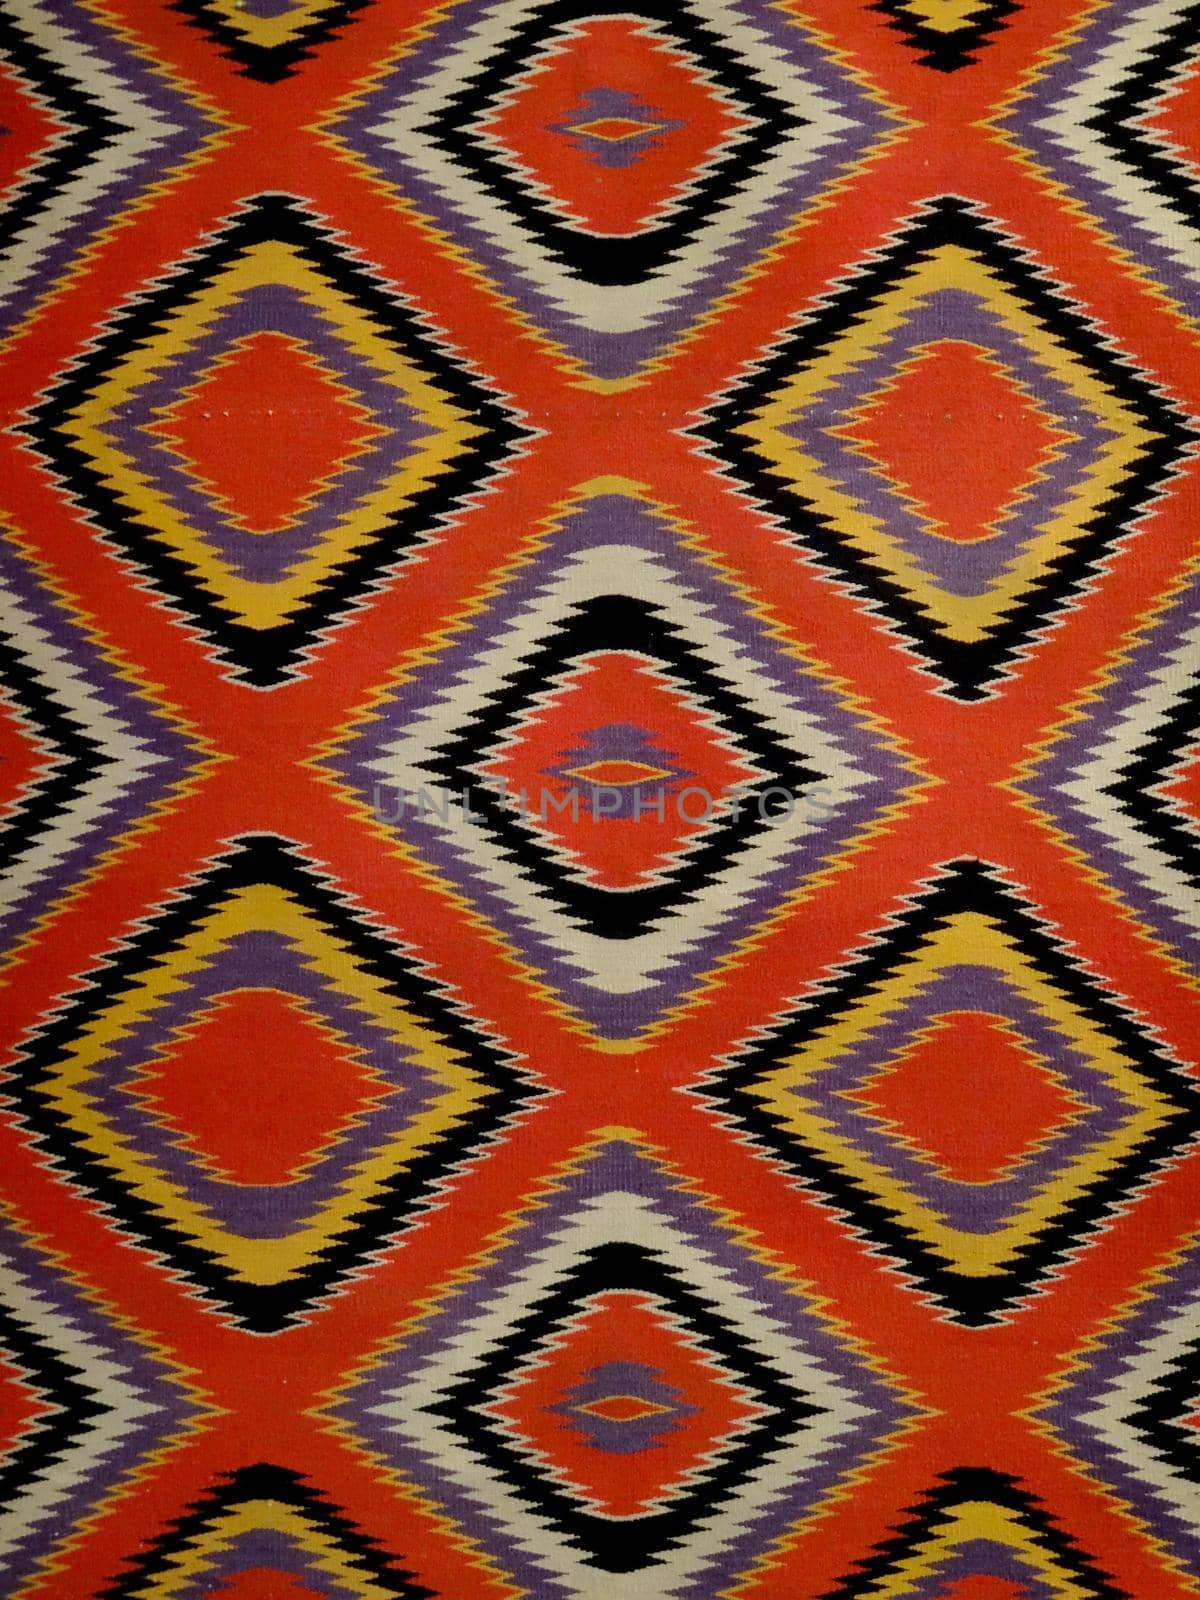 Pattern Red, Orange, White, purple, Black, and yellow Diamond Blanket/ Rug - Navajo Artist, made about 1885 of cotton and wool.                              